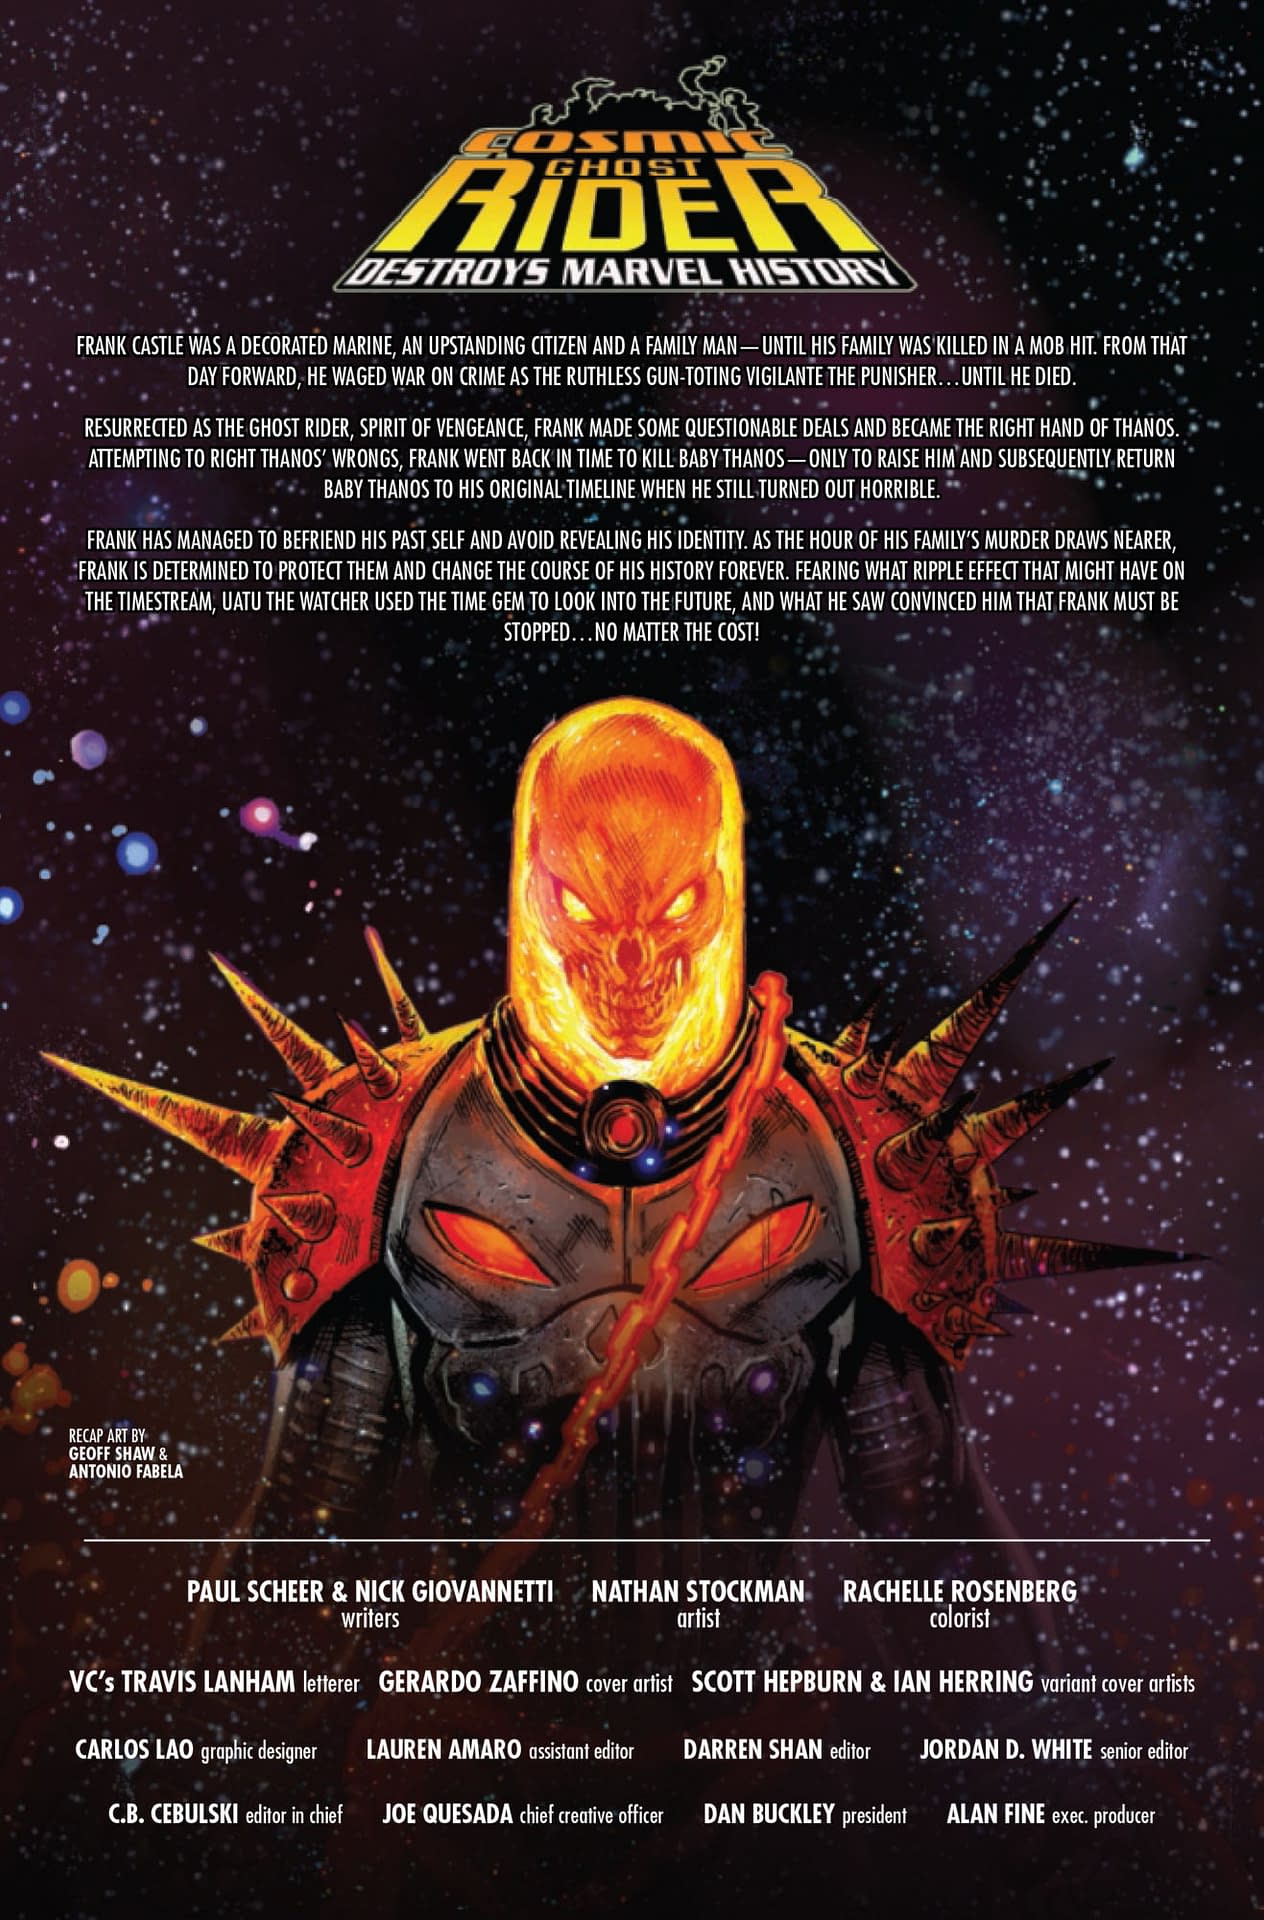 The First Time Anyone's Called Frank Castle a Hippie - Cosmic Ghost Rider Destroys Marvel History #5 Preview